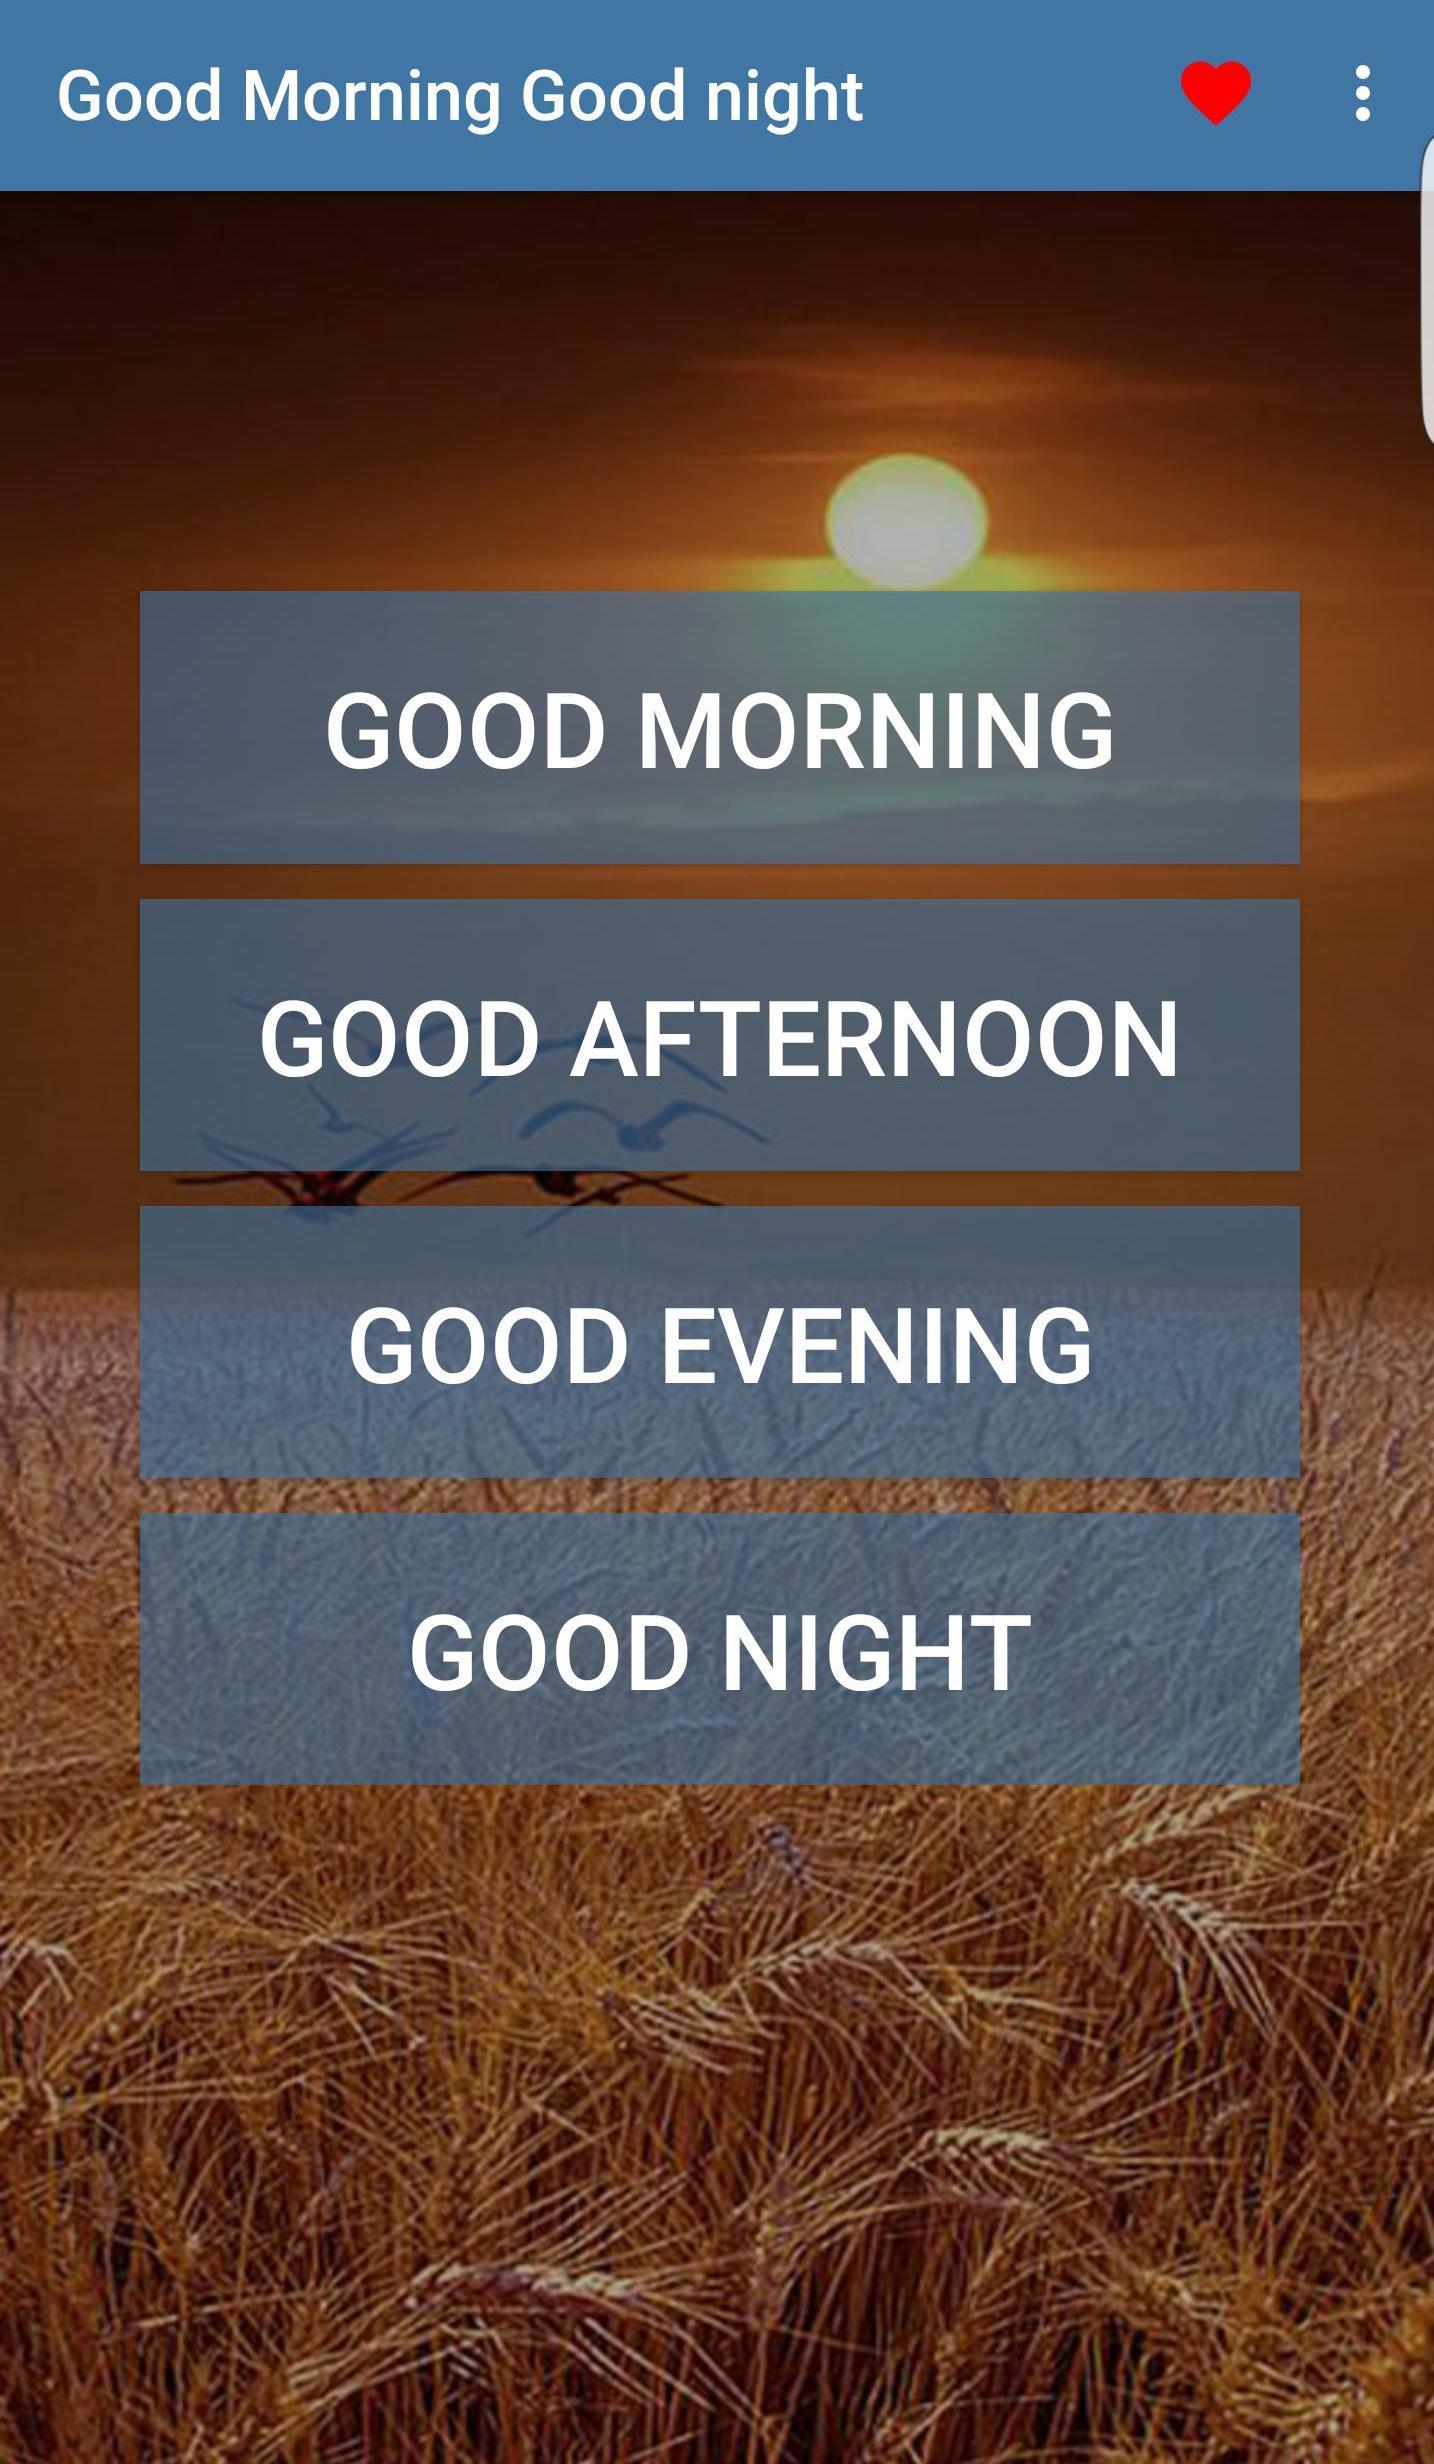 Good Morning Good Night And Evening Gif For Android Apk Download